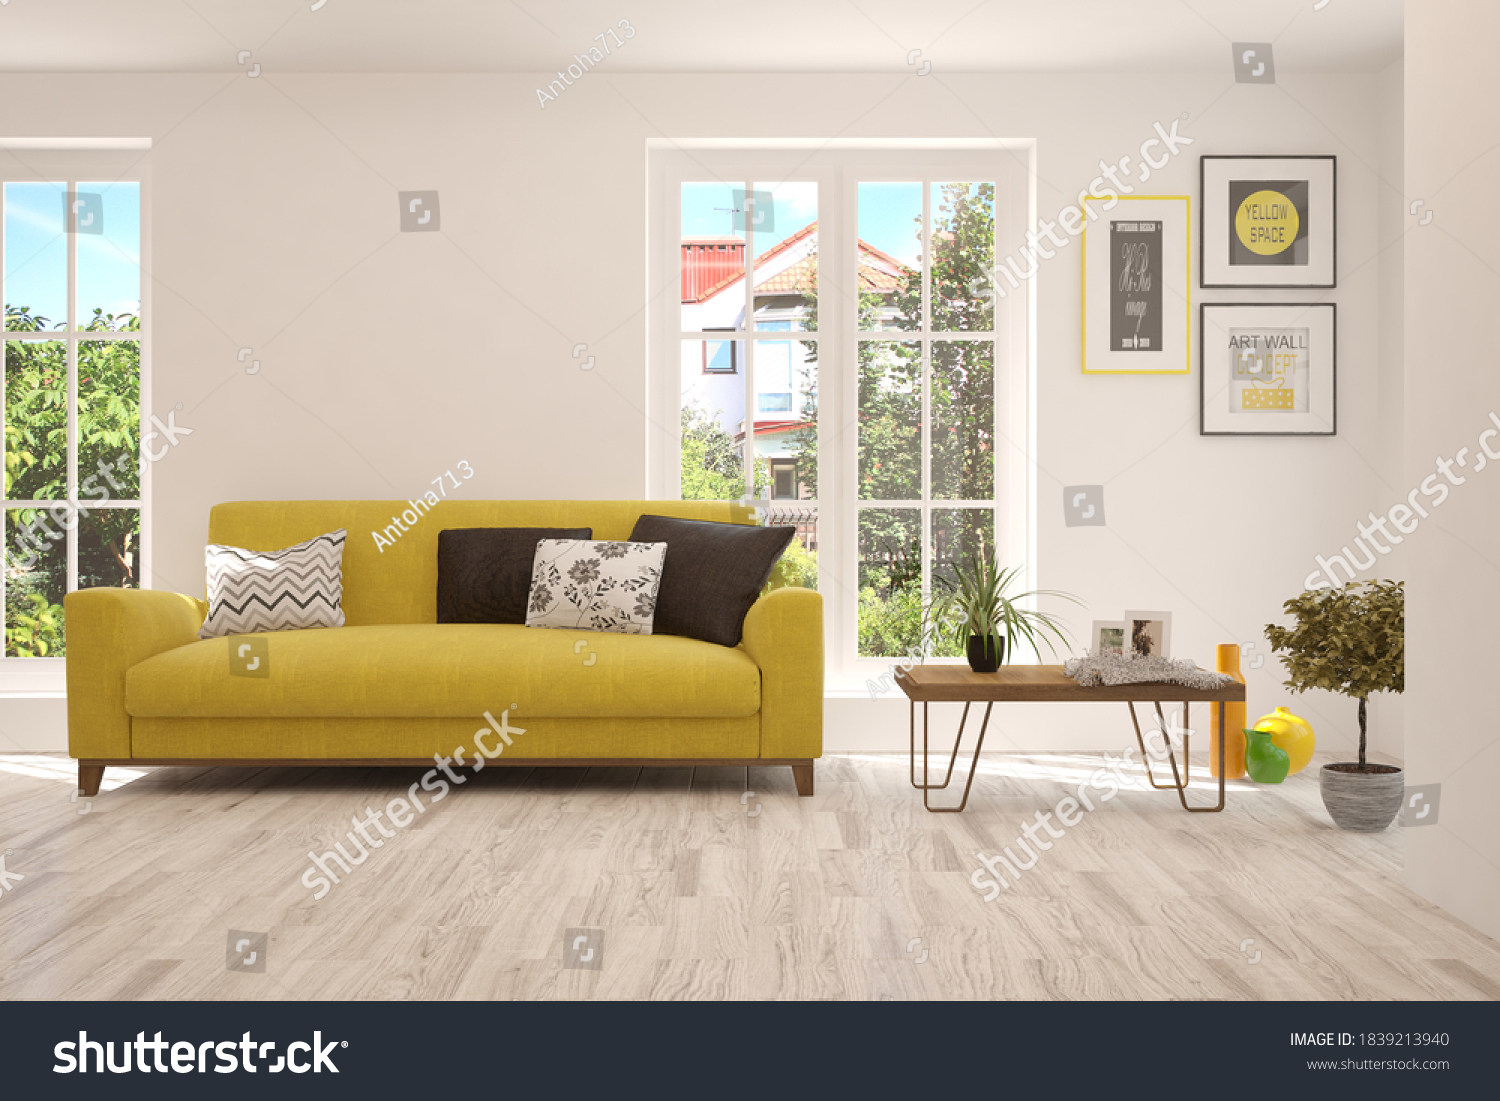 White living room with sofa and summer landscape in window. Scandinavian interior design. 3D illustration #1839213940